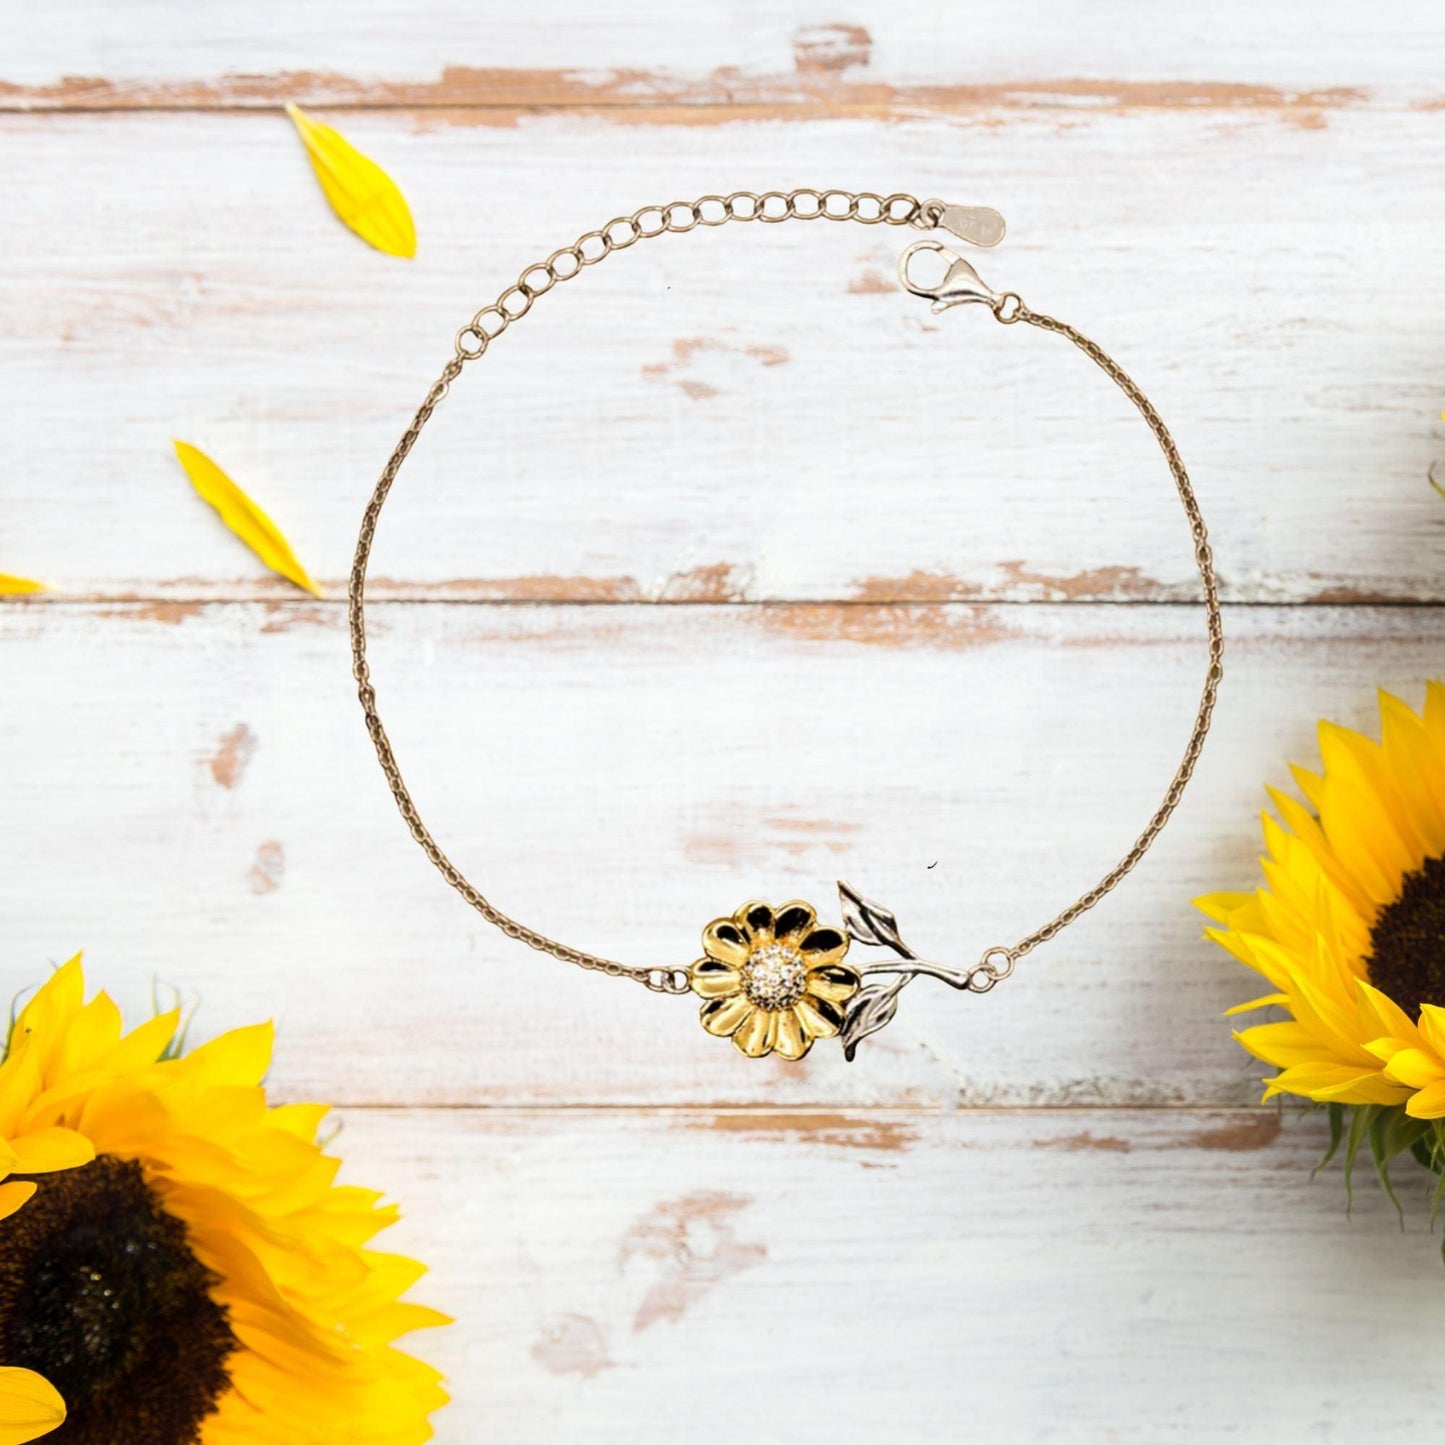 Game Warden Sunflower Bracelet - Thanks for being who you are - Birthday Christmas Jewelry Gifts Coworkers Colleague Boss - Mallard Moon Gift Shop